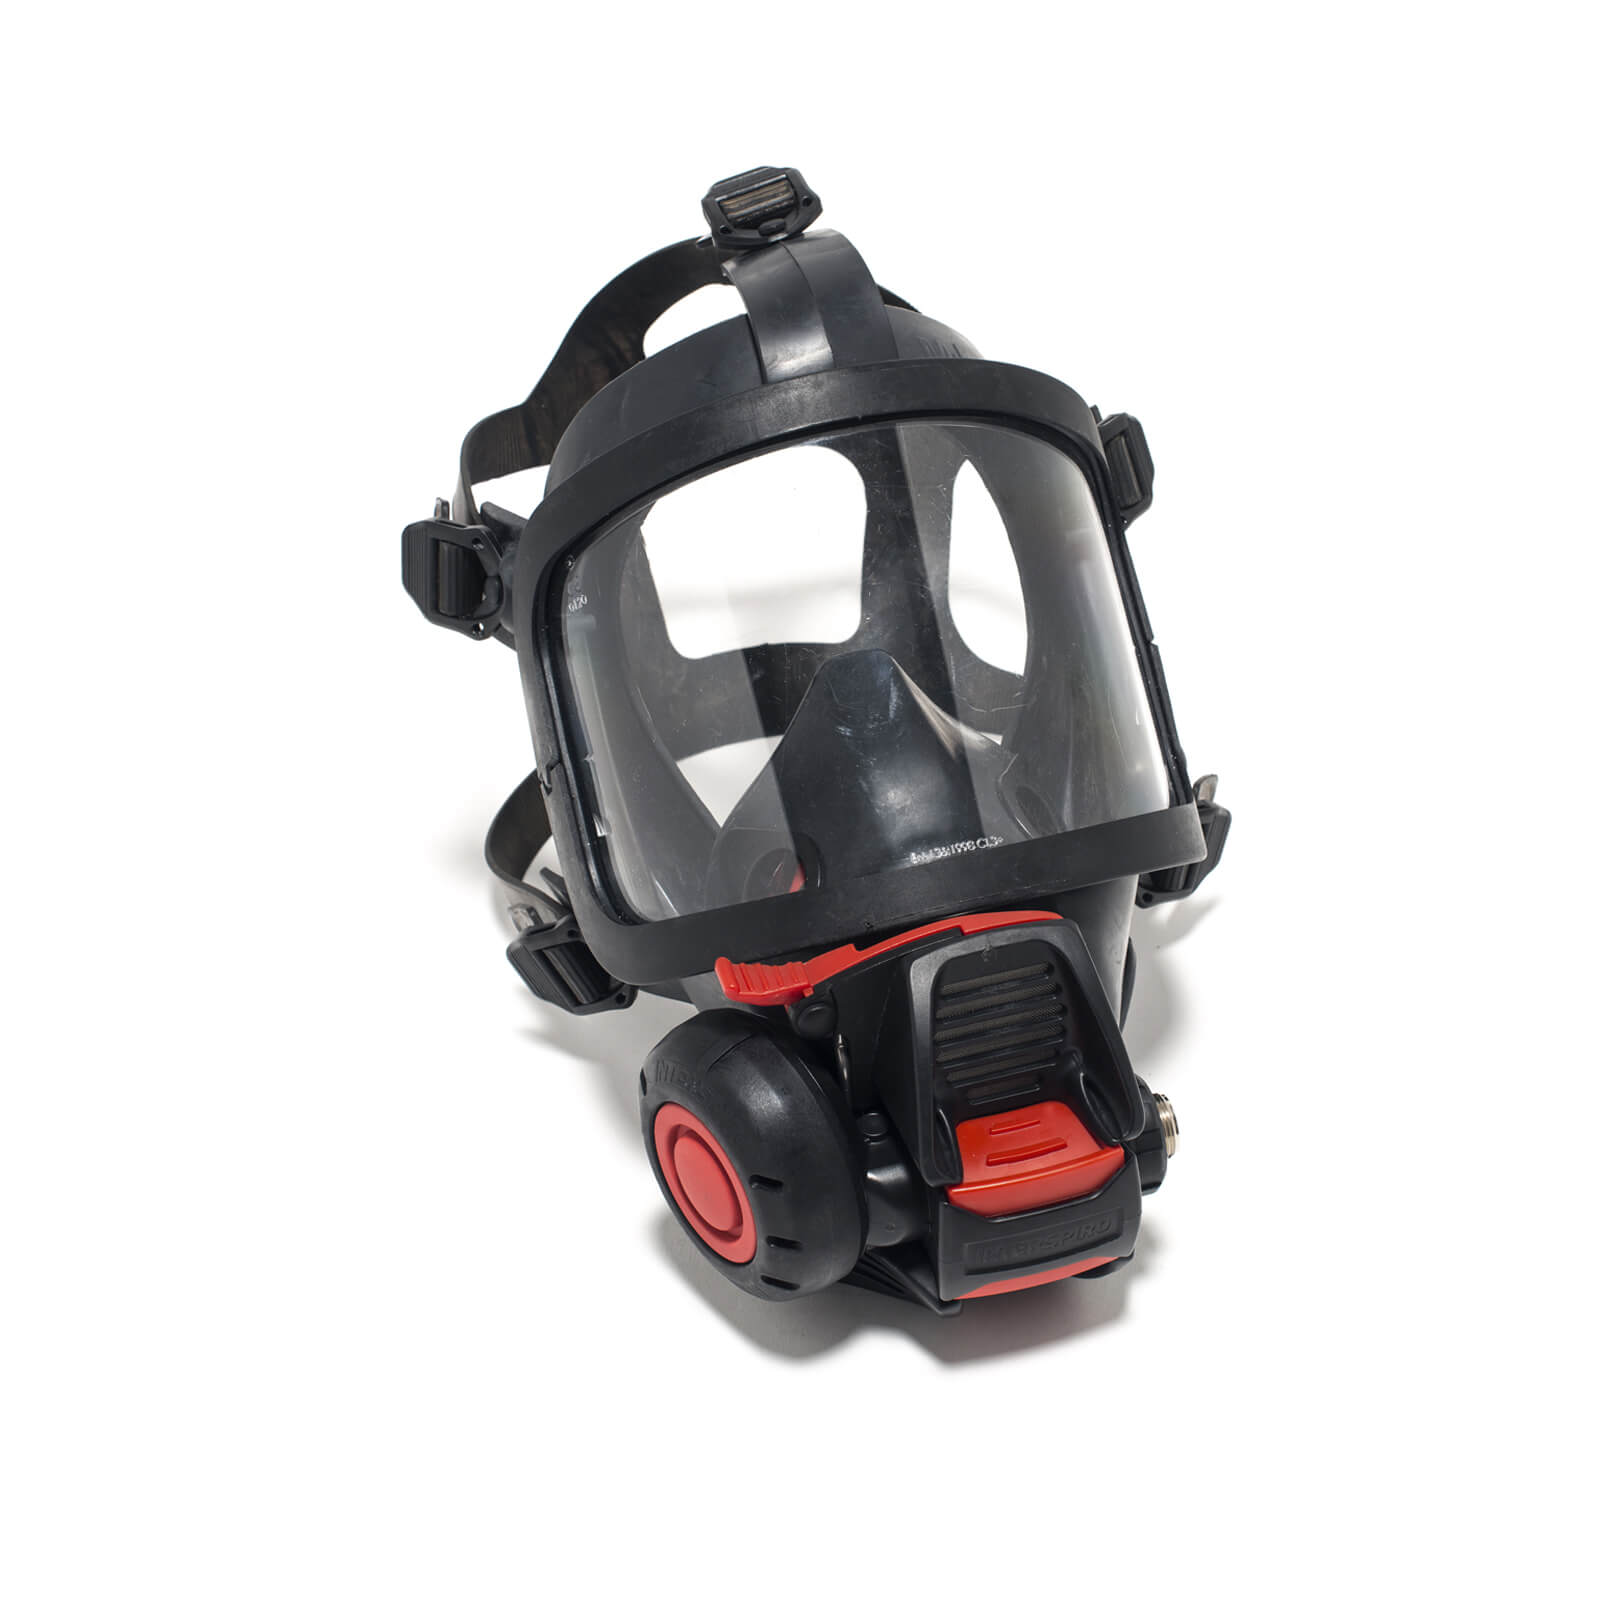 Face mask for Interspiro breathing apparatus Inspire-H